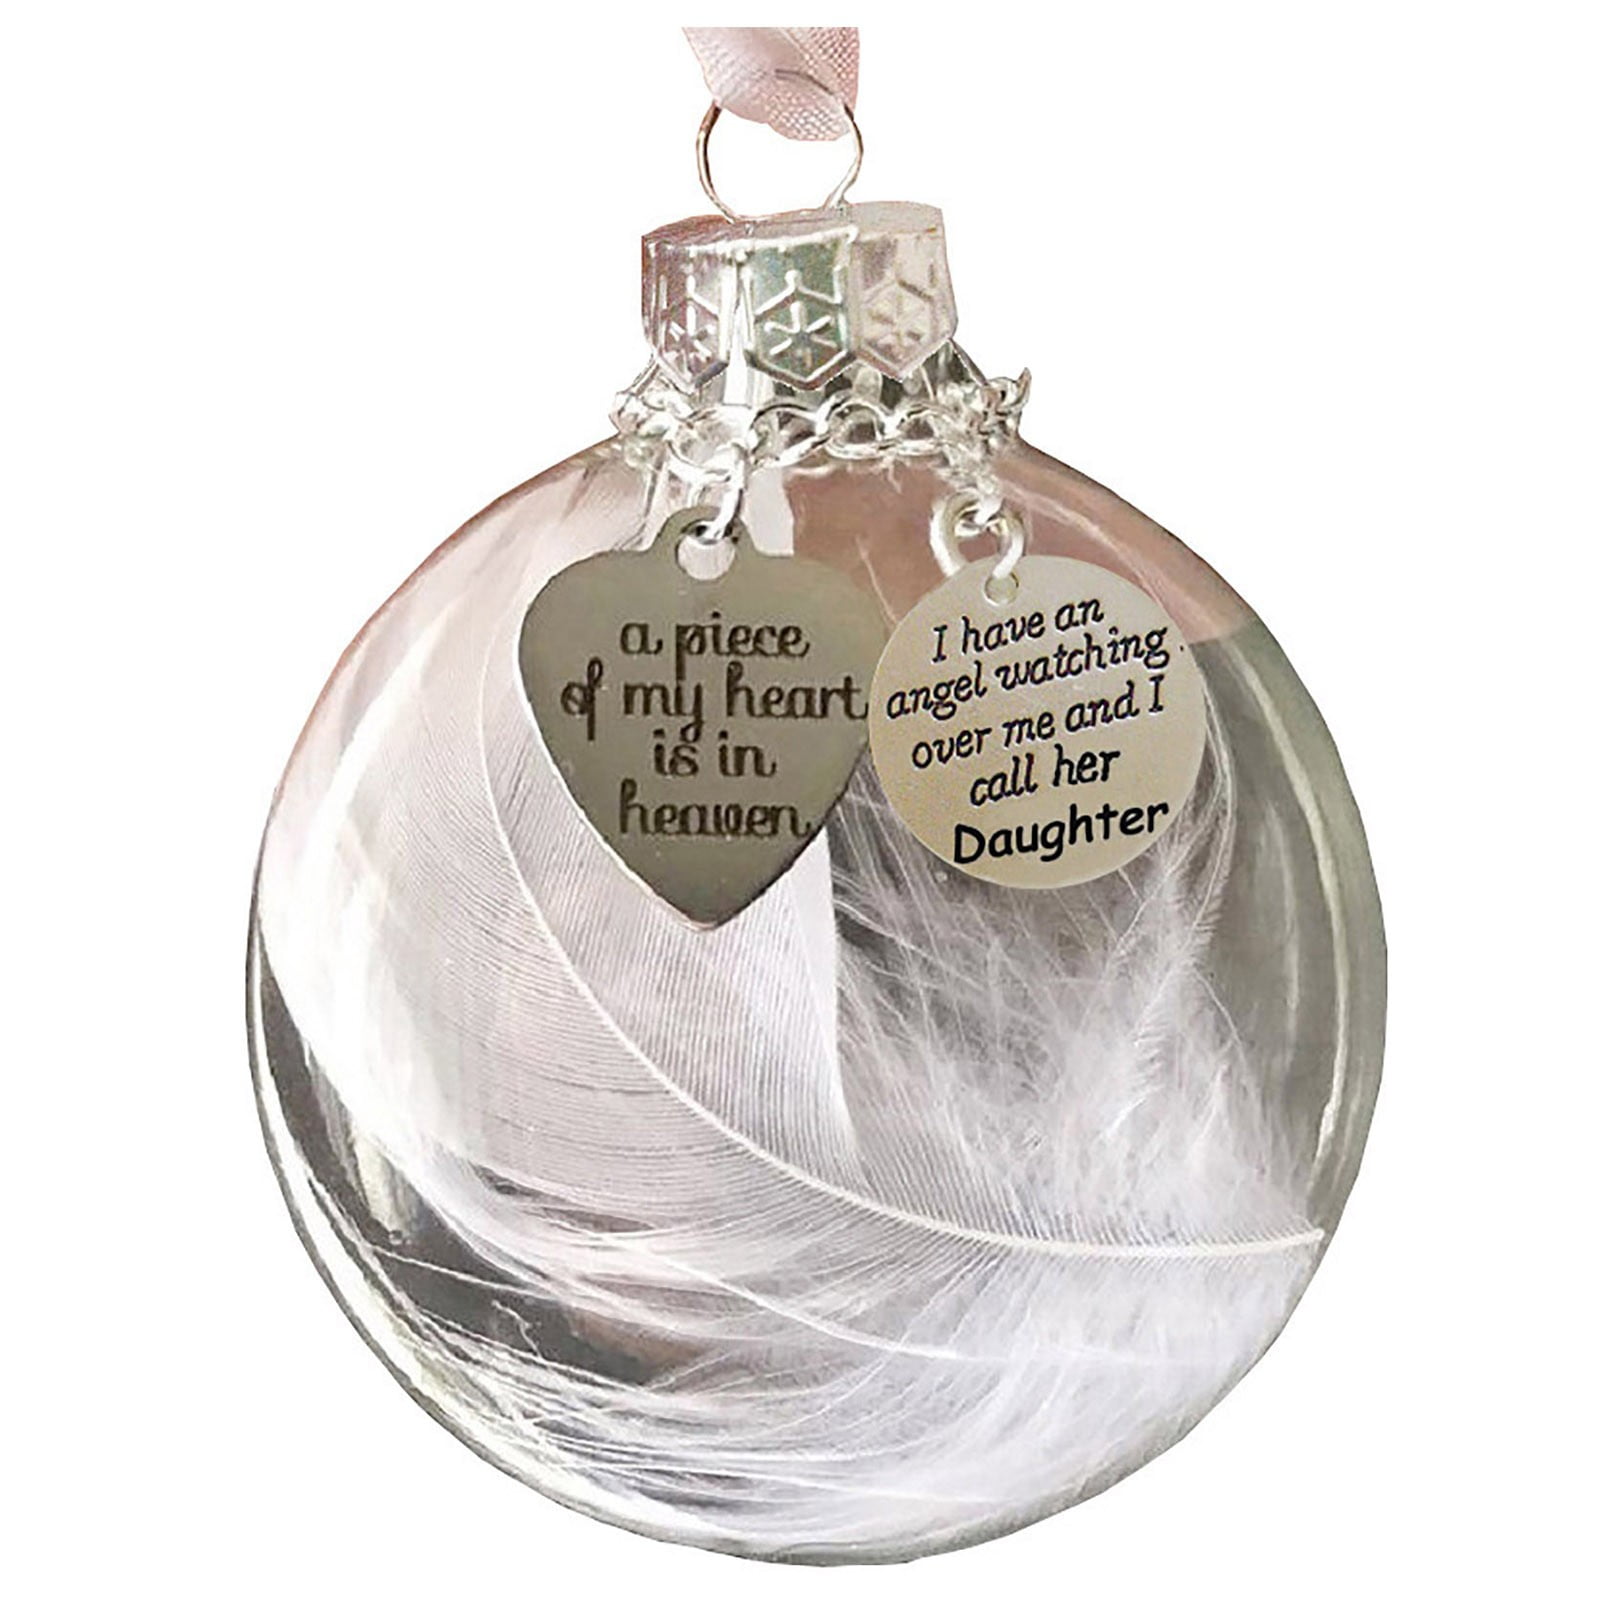 Sympathy Yellow Grandma Stainless Steel Gift Birthday Sister Angel Ornament Aunt Daughter Mom Loss of a Loved One Grief